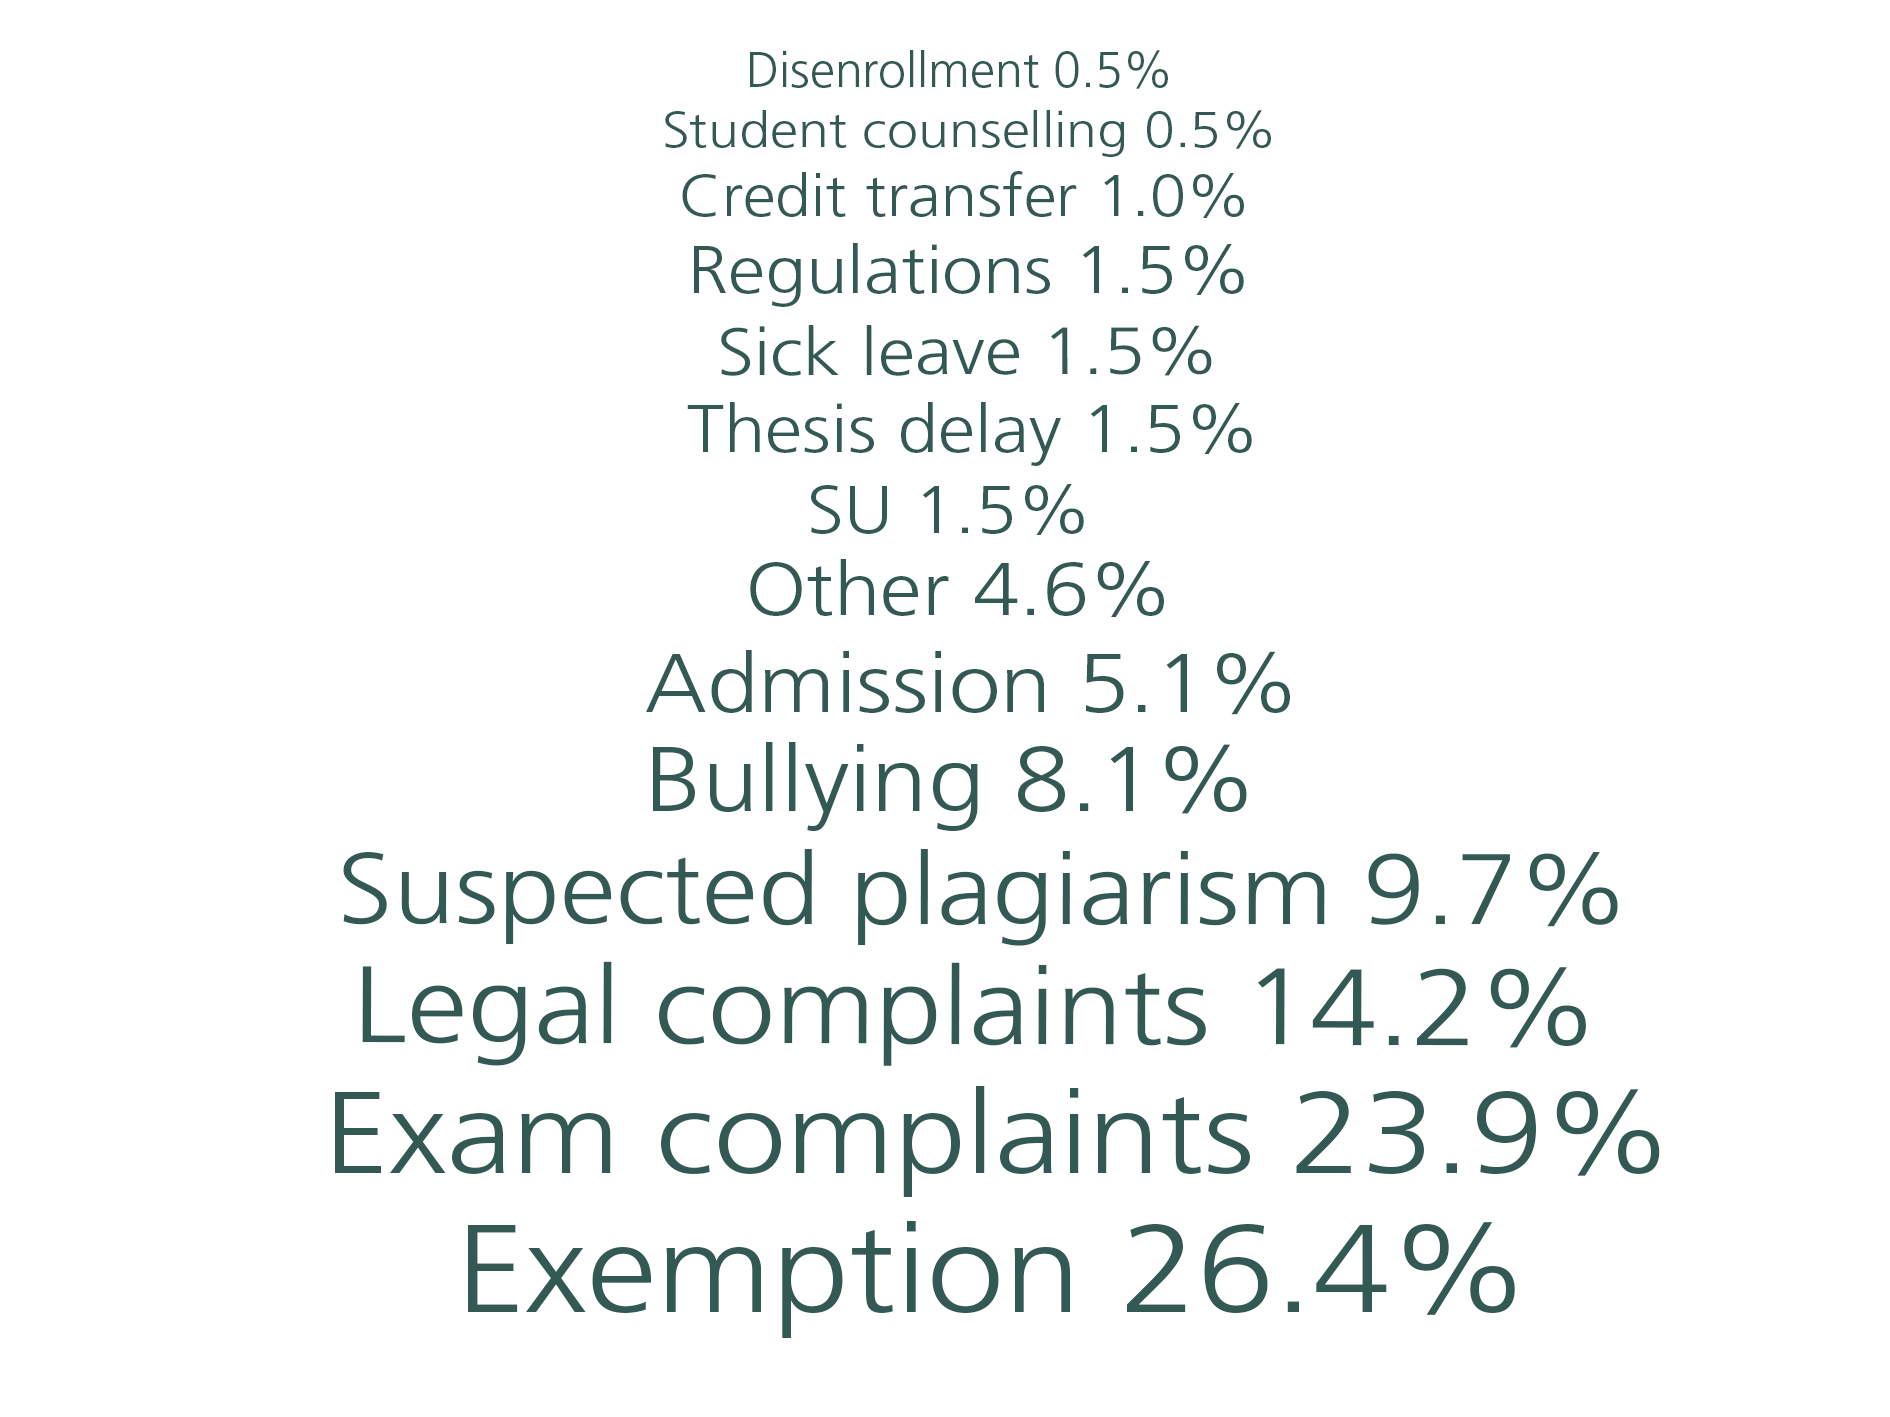 Text on image: Exemption: 26.4% Exam complaints: 23.9% Legal complaints 14.2% Suspected plagiarism: 9.7% Bullying: 8.1% Admissions: 5.1% Other: 4.6% SU: 1.5% Thesis delay: 1.5% Sick leave: 1.5% Regulations: 1.5% Credit transfer: 1.0% Student counselling: 0.5% Disenrollment: 0.5%